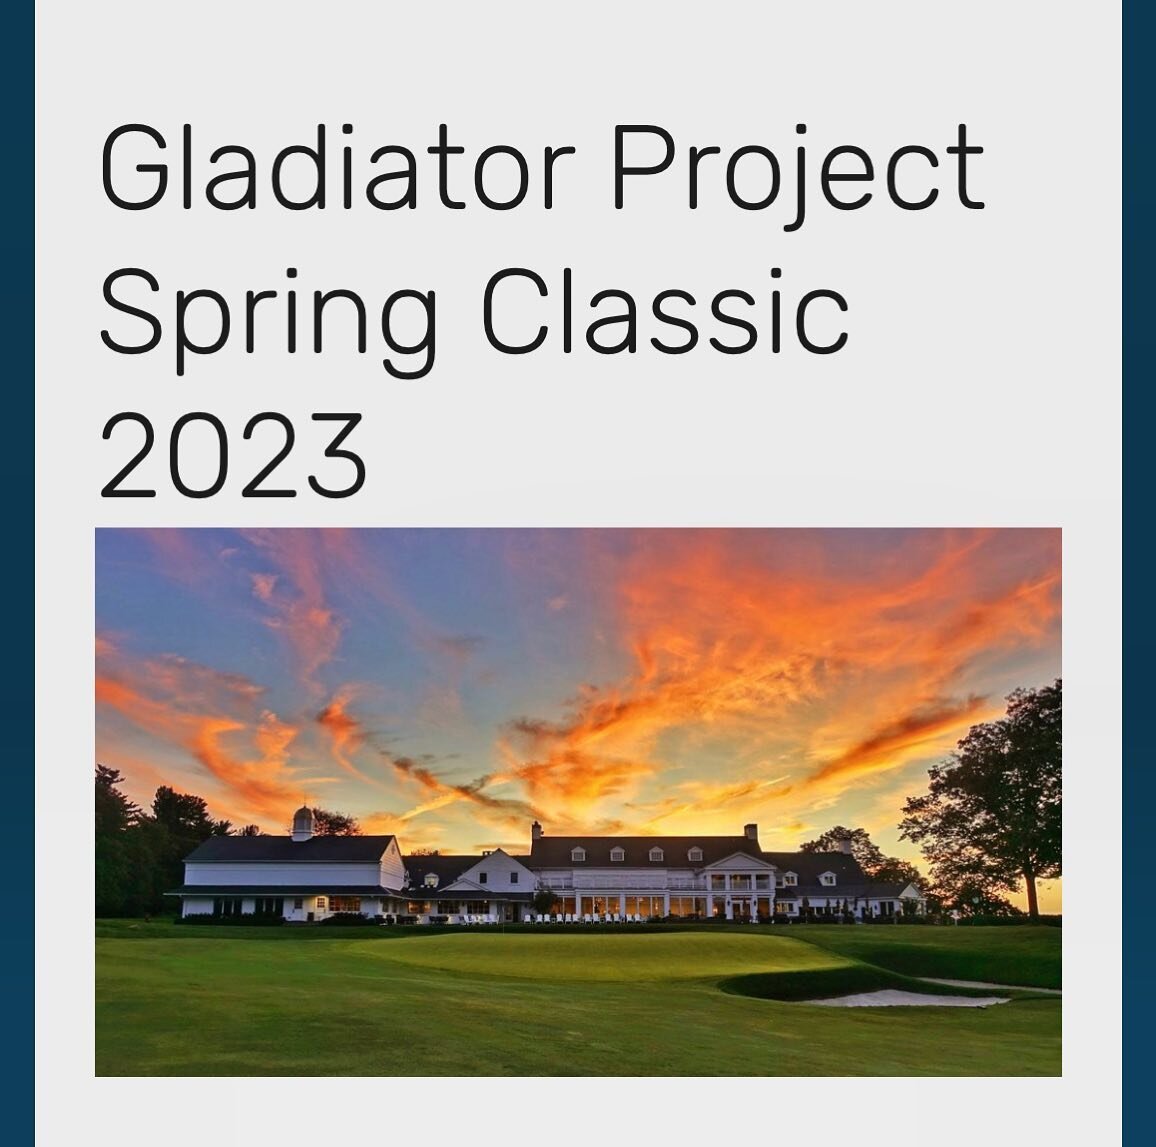 Do something fun this Friday: register for the Gladiator Project Spring Classic! Link in bio. 

Registration is now open for a day of incredible golf and hospitality at Plainfield Country Club, one of the country&rsquo;s top courses. Every Gladiator 